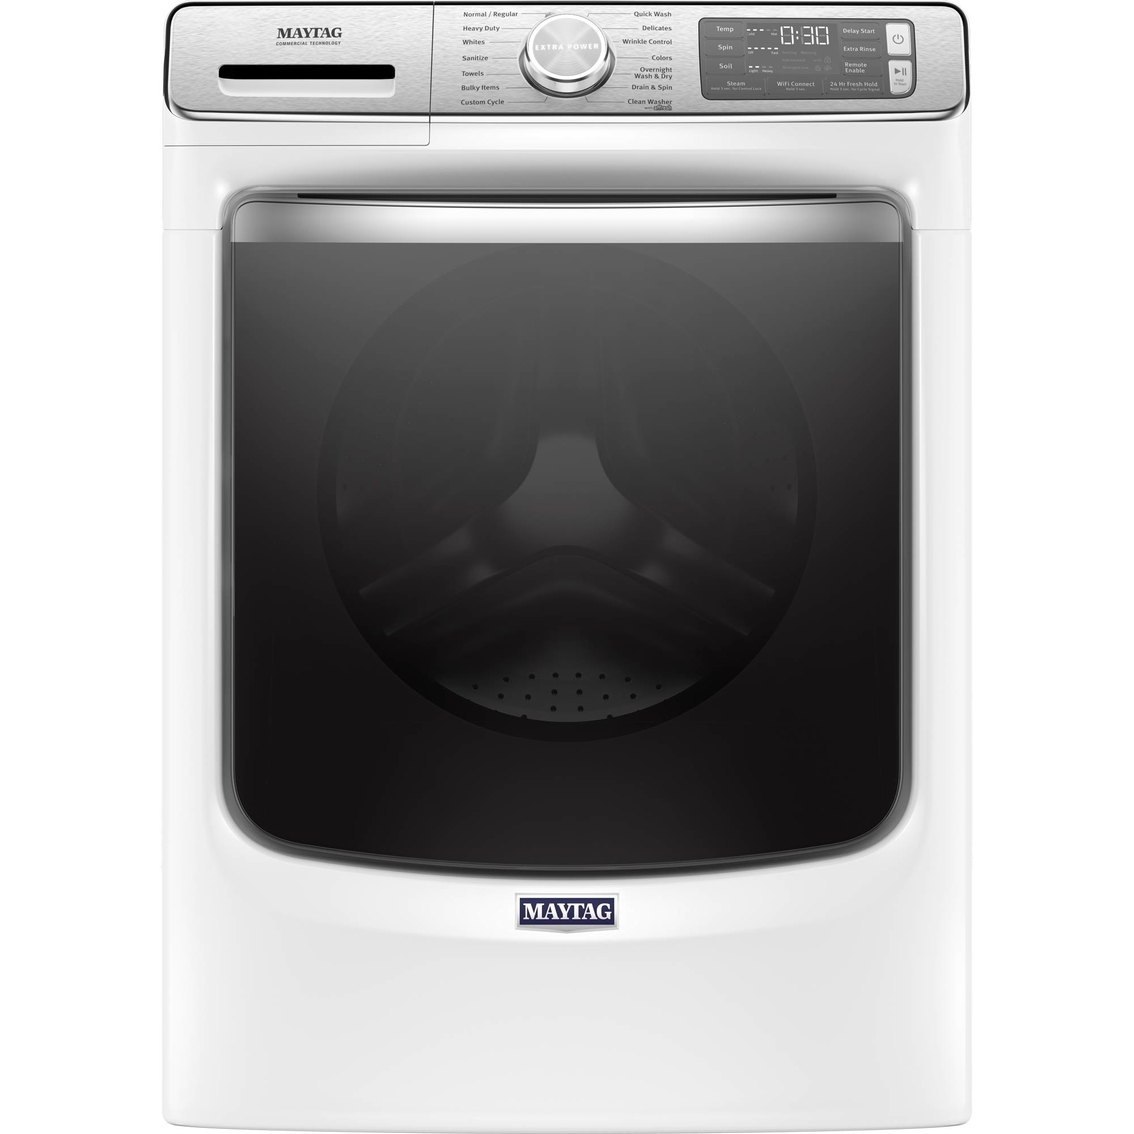 Washer Tips Clean Washer Washer Maytag Washers